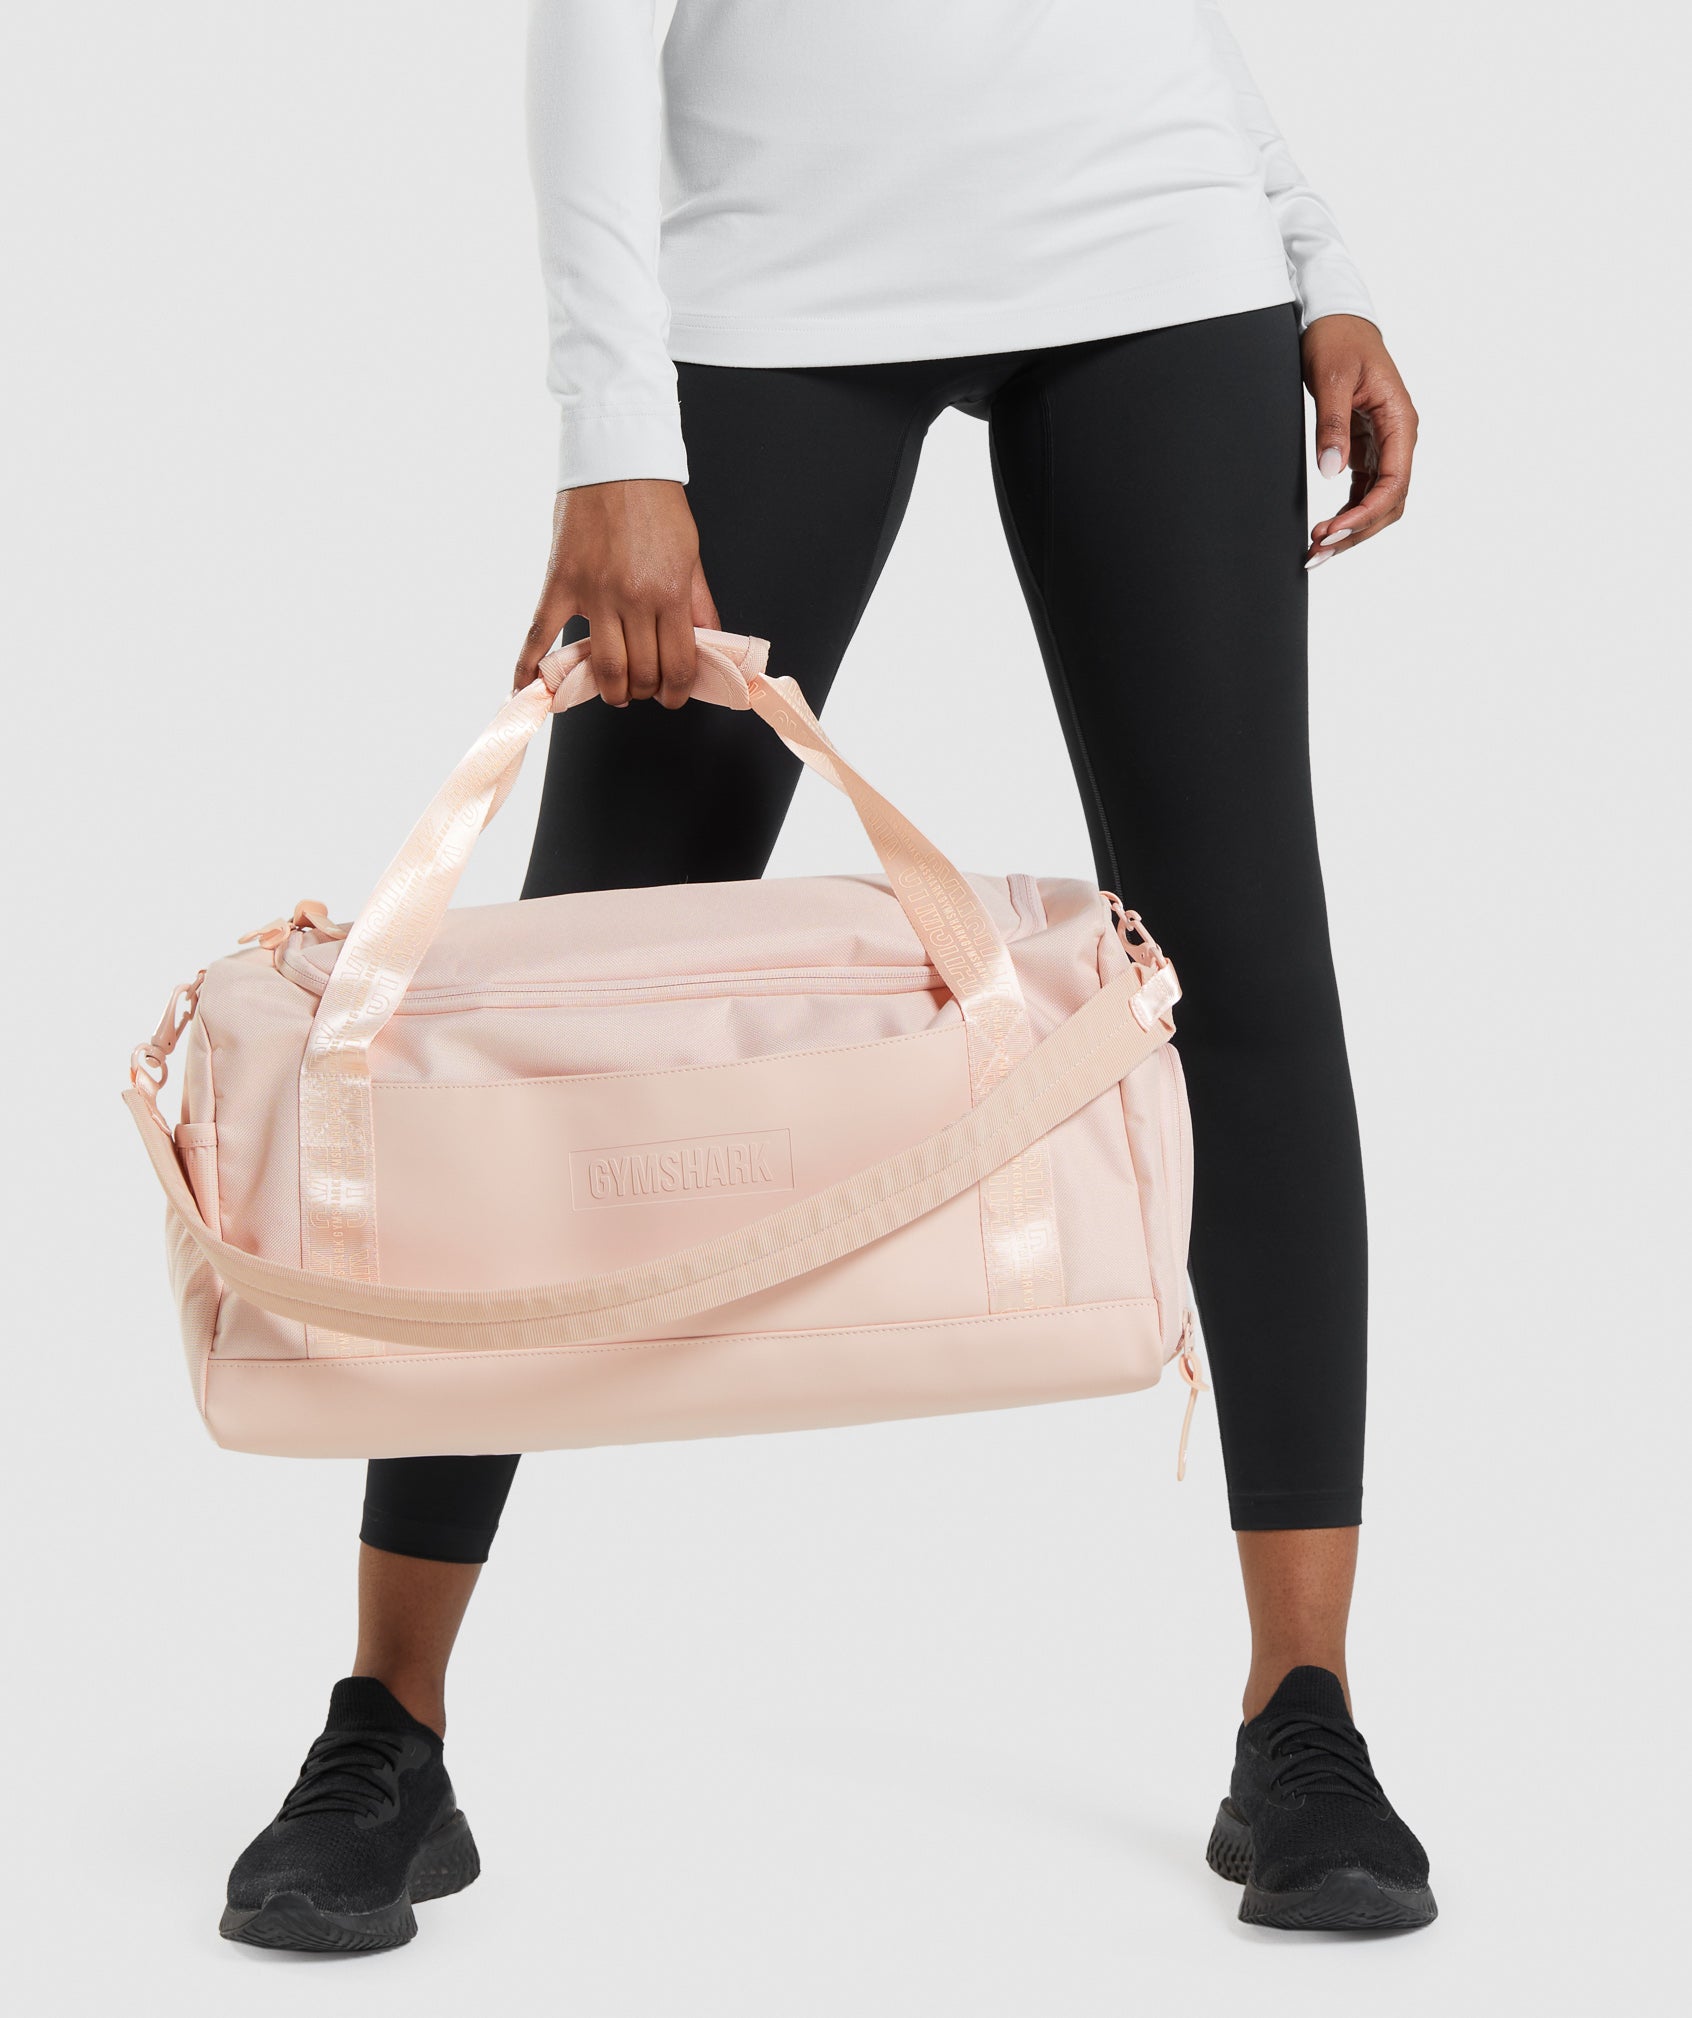 The 10 Best Gym Bags for However You Get Fit  2022  Field Mag